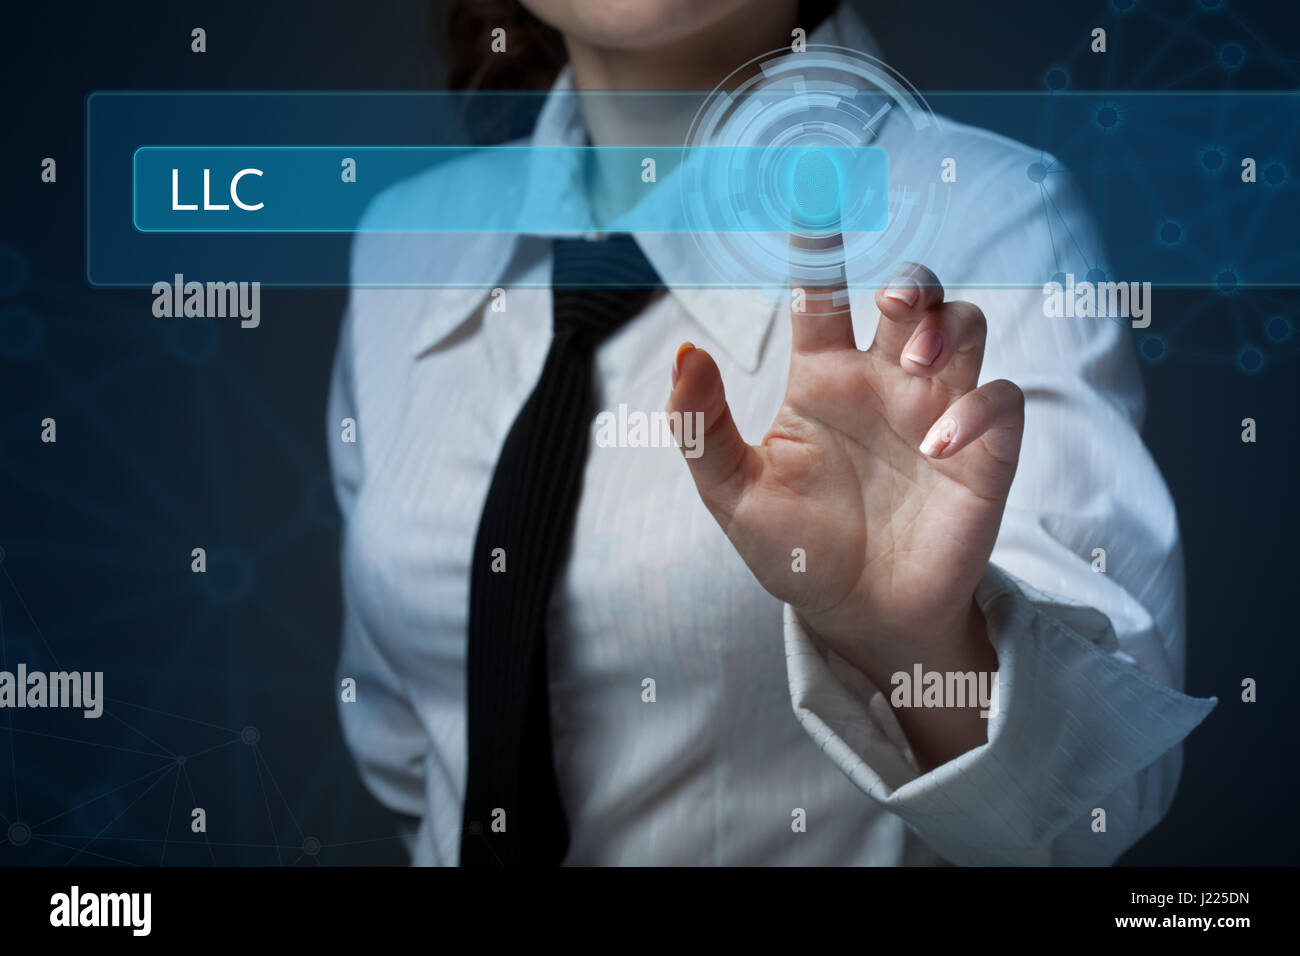 Business, technology, internet and networking concept. Business woman presses a button on the virtual screen: LLC Stock Photo